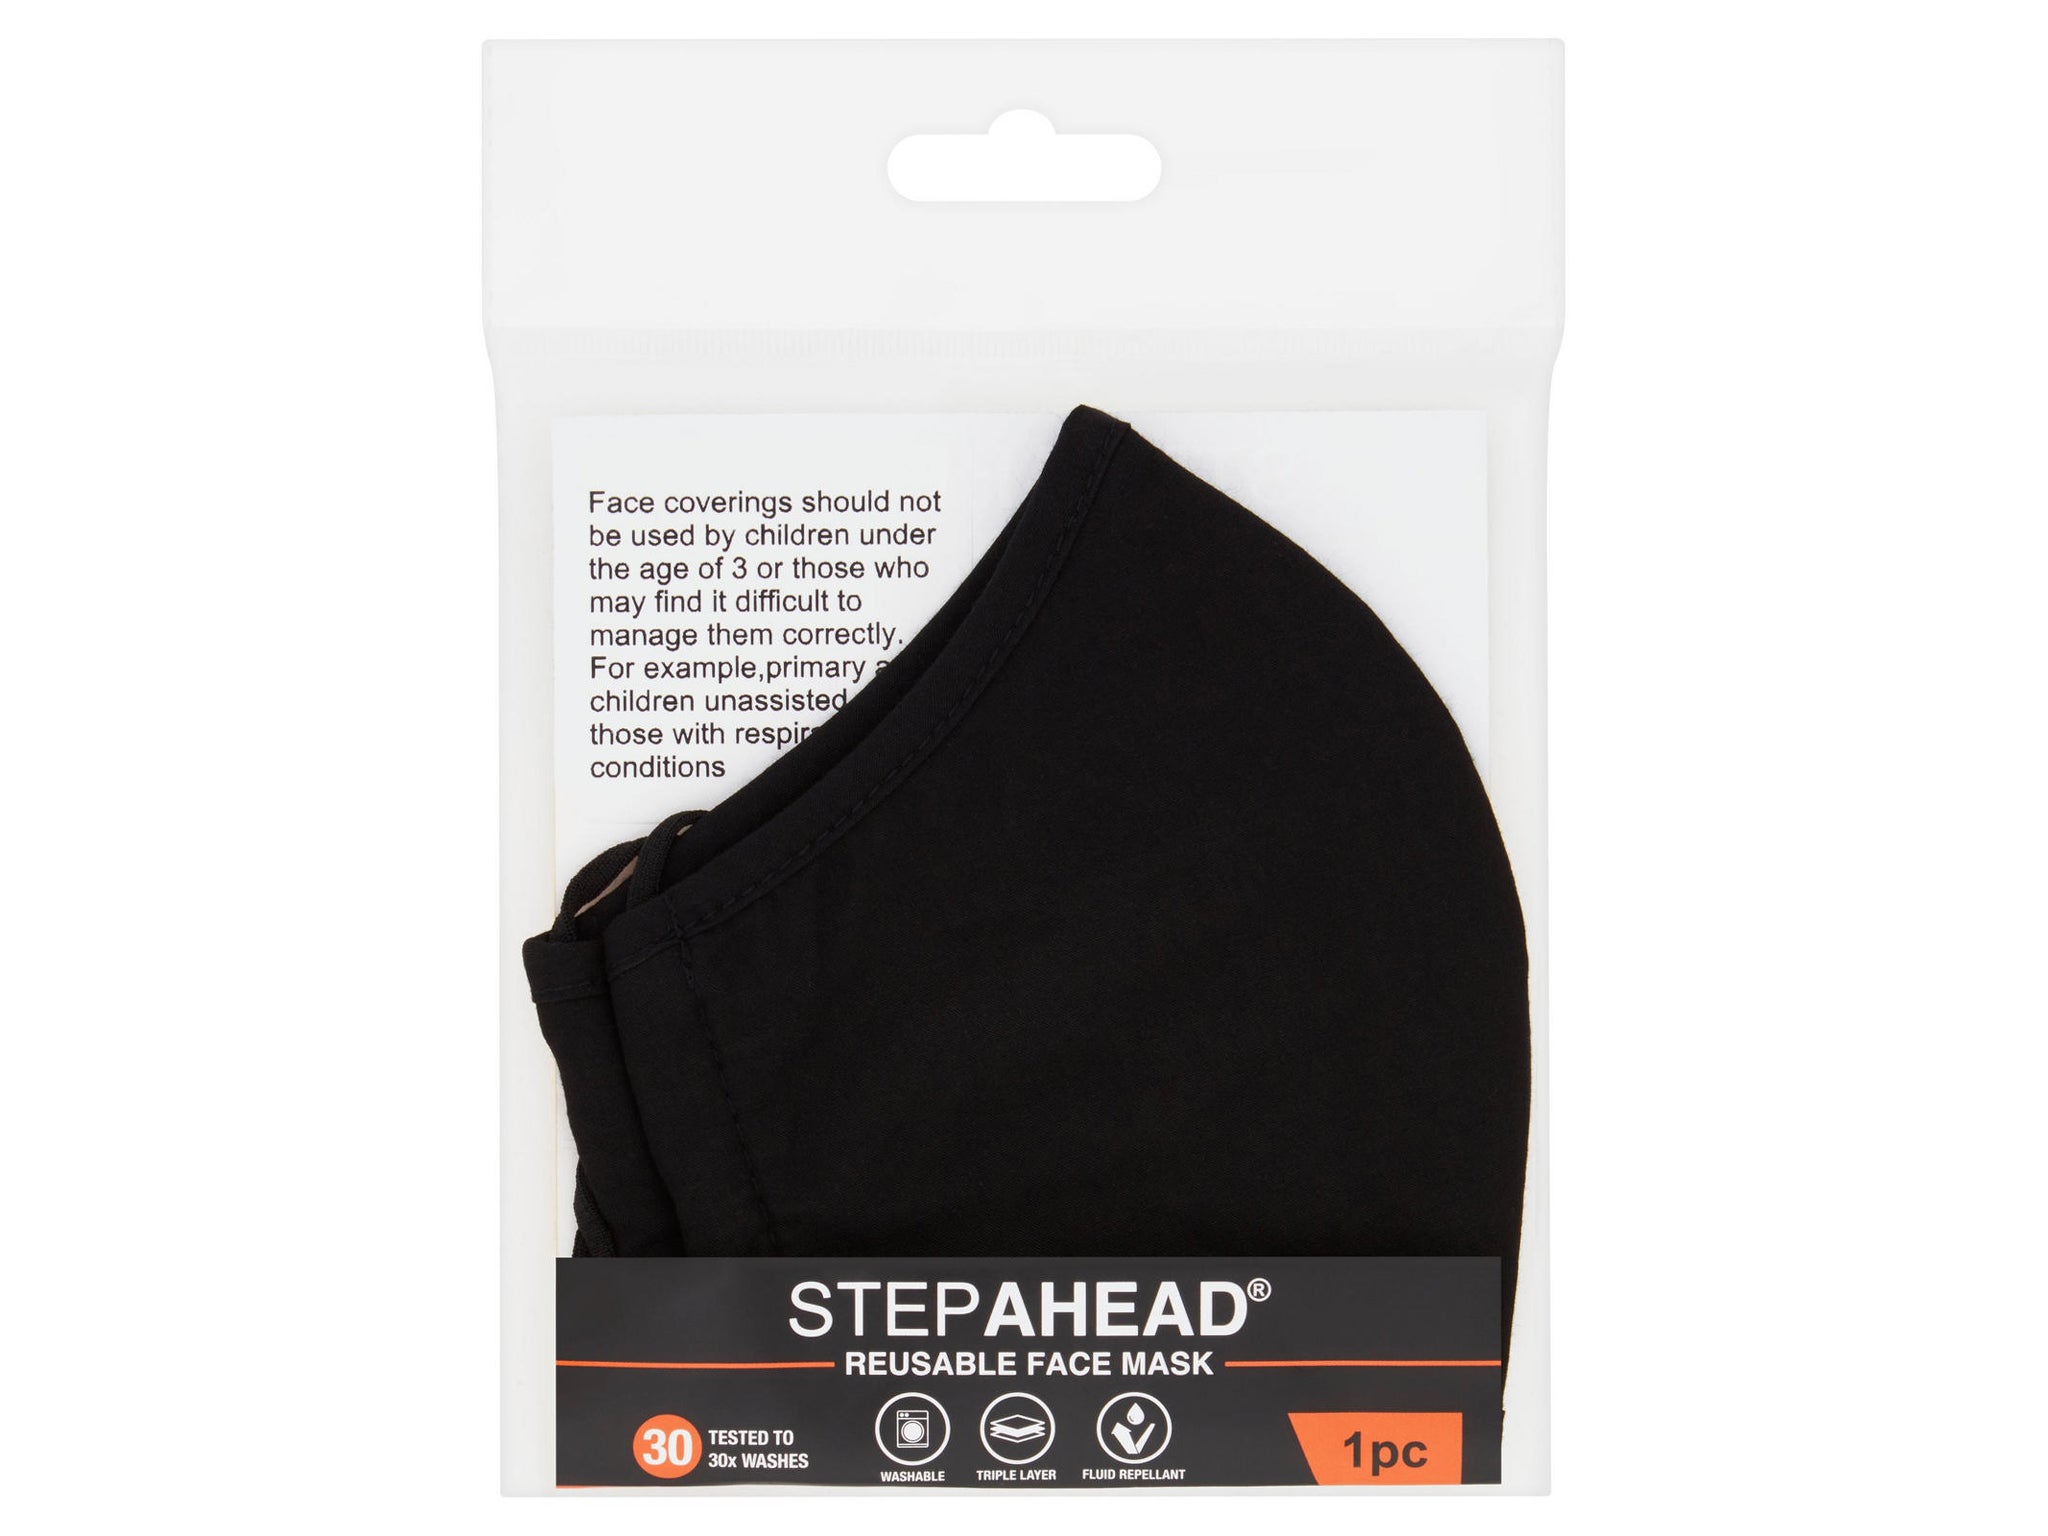 While currently unavailable online, keep your eyes peeled for this reusable mask in-store Iceland